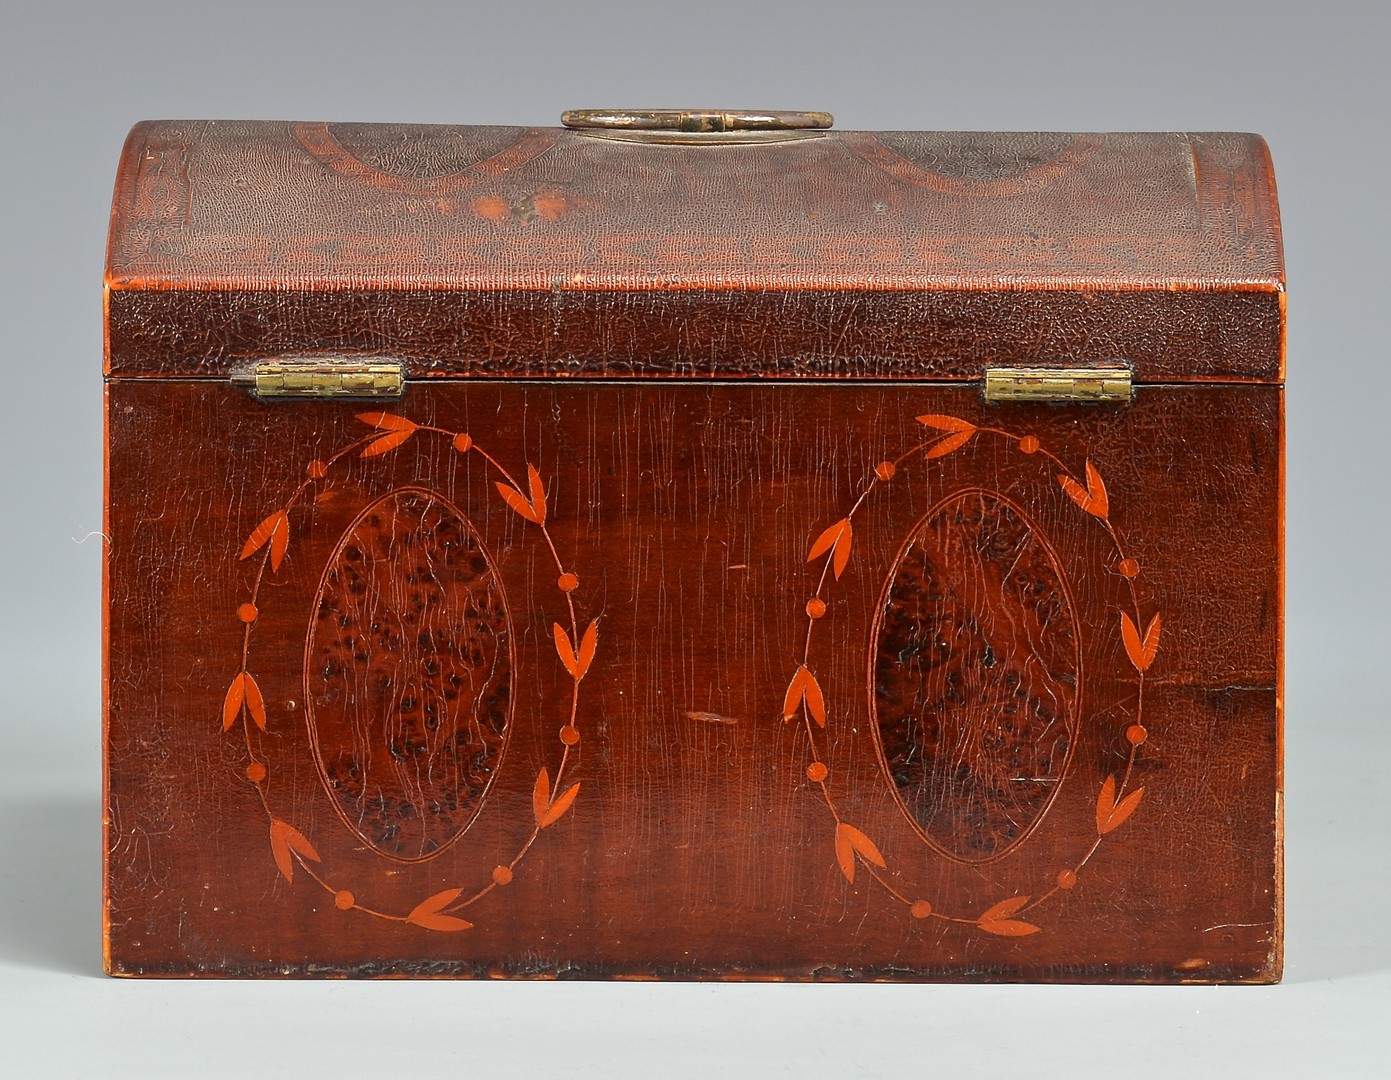 Lot 269: Southern Inlaid Tea Caddy, poss. Baltimore